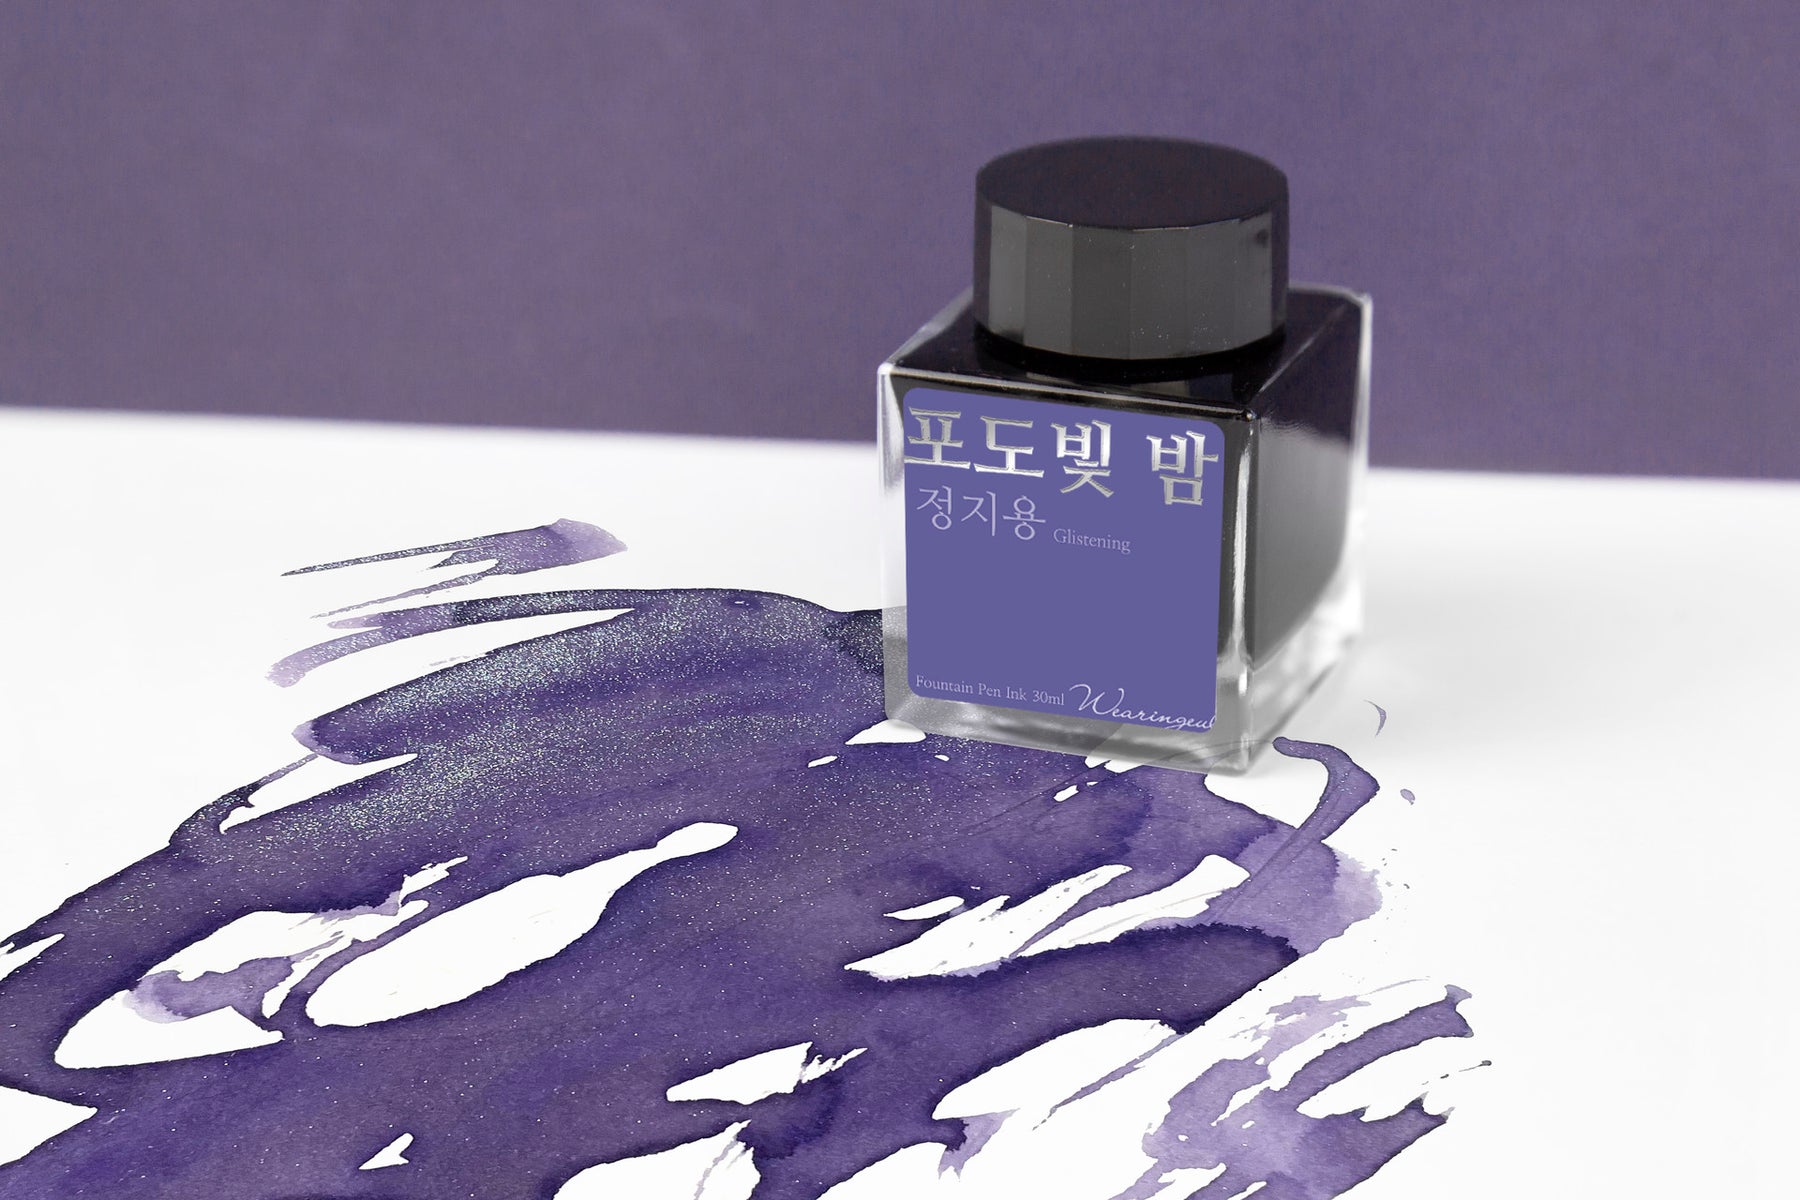 Wearingeul Grape colored night - Shimmer Ink